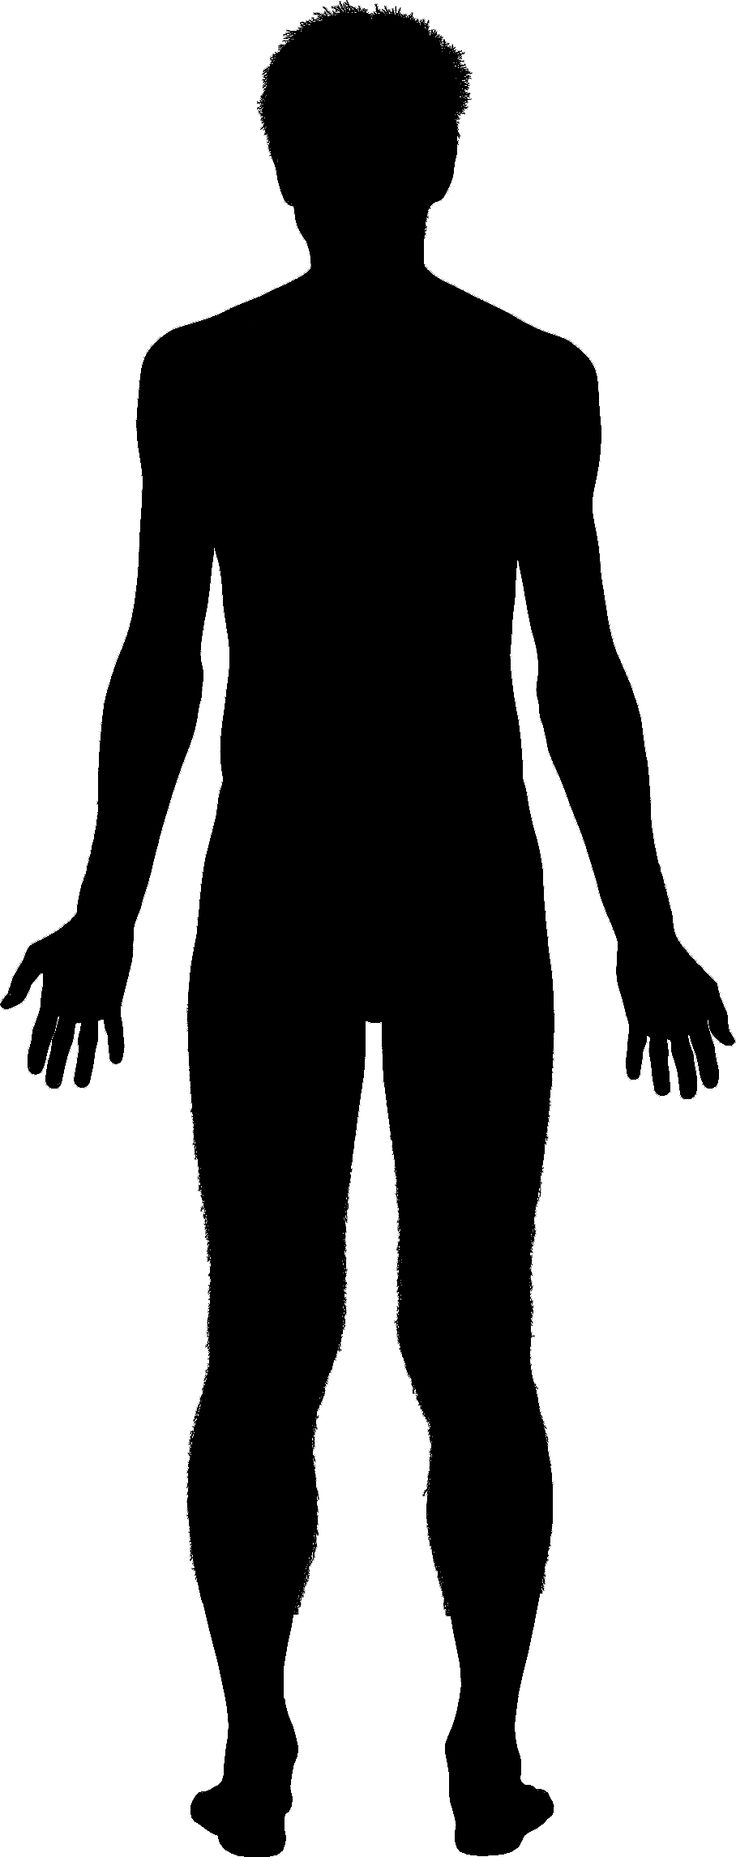 clipart human being - photo #9